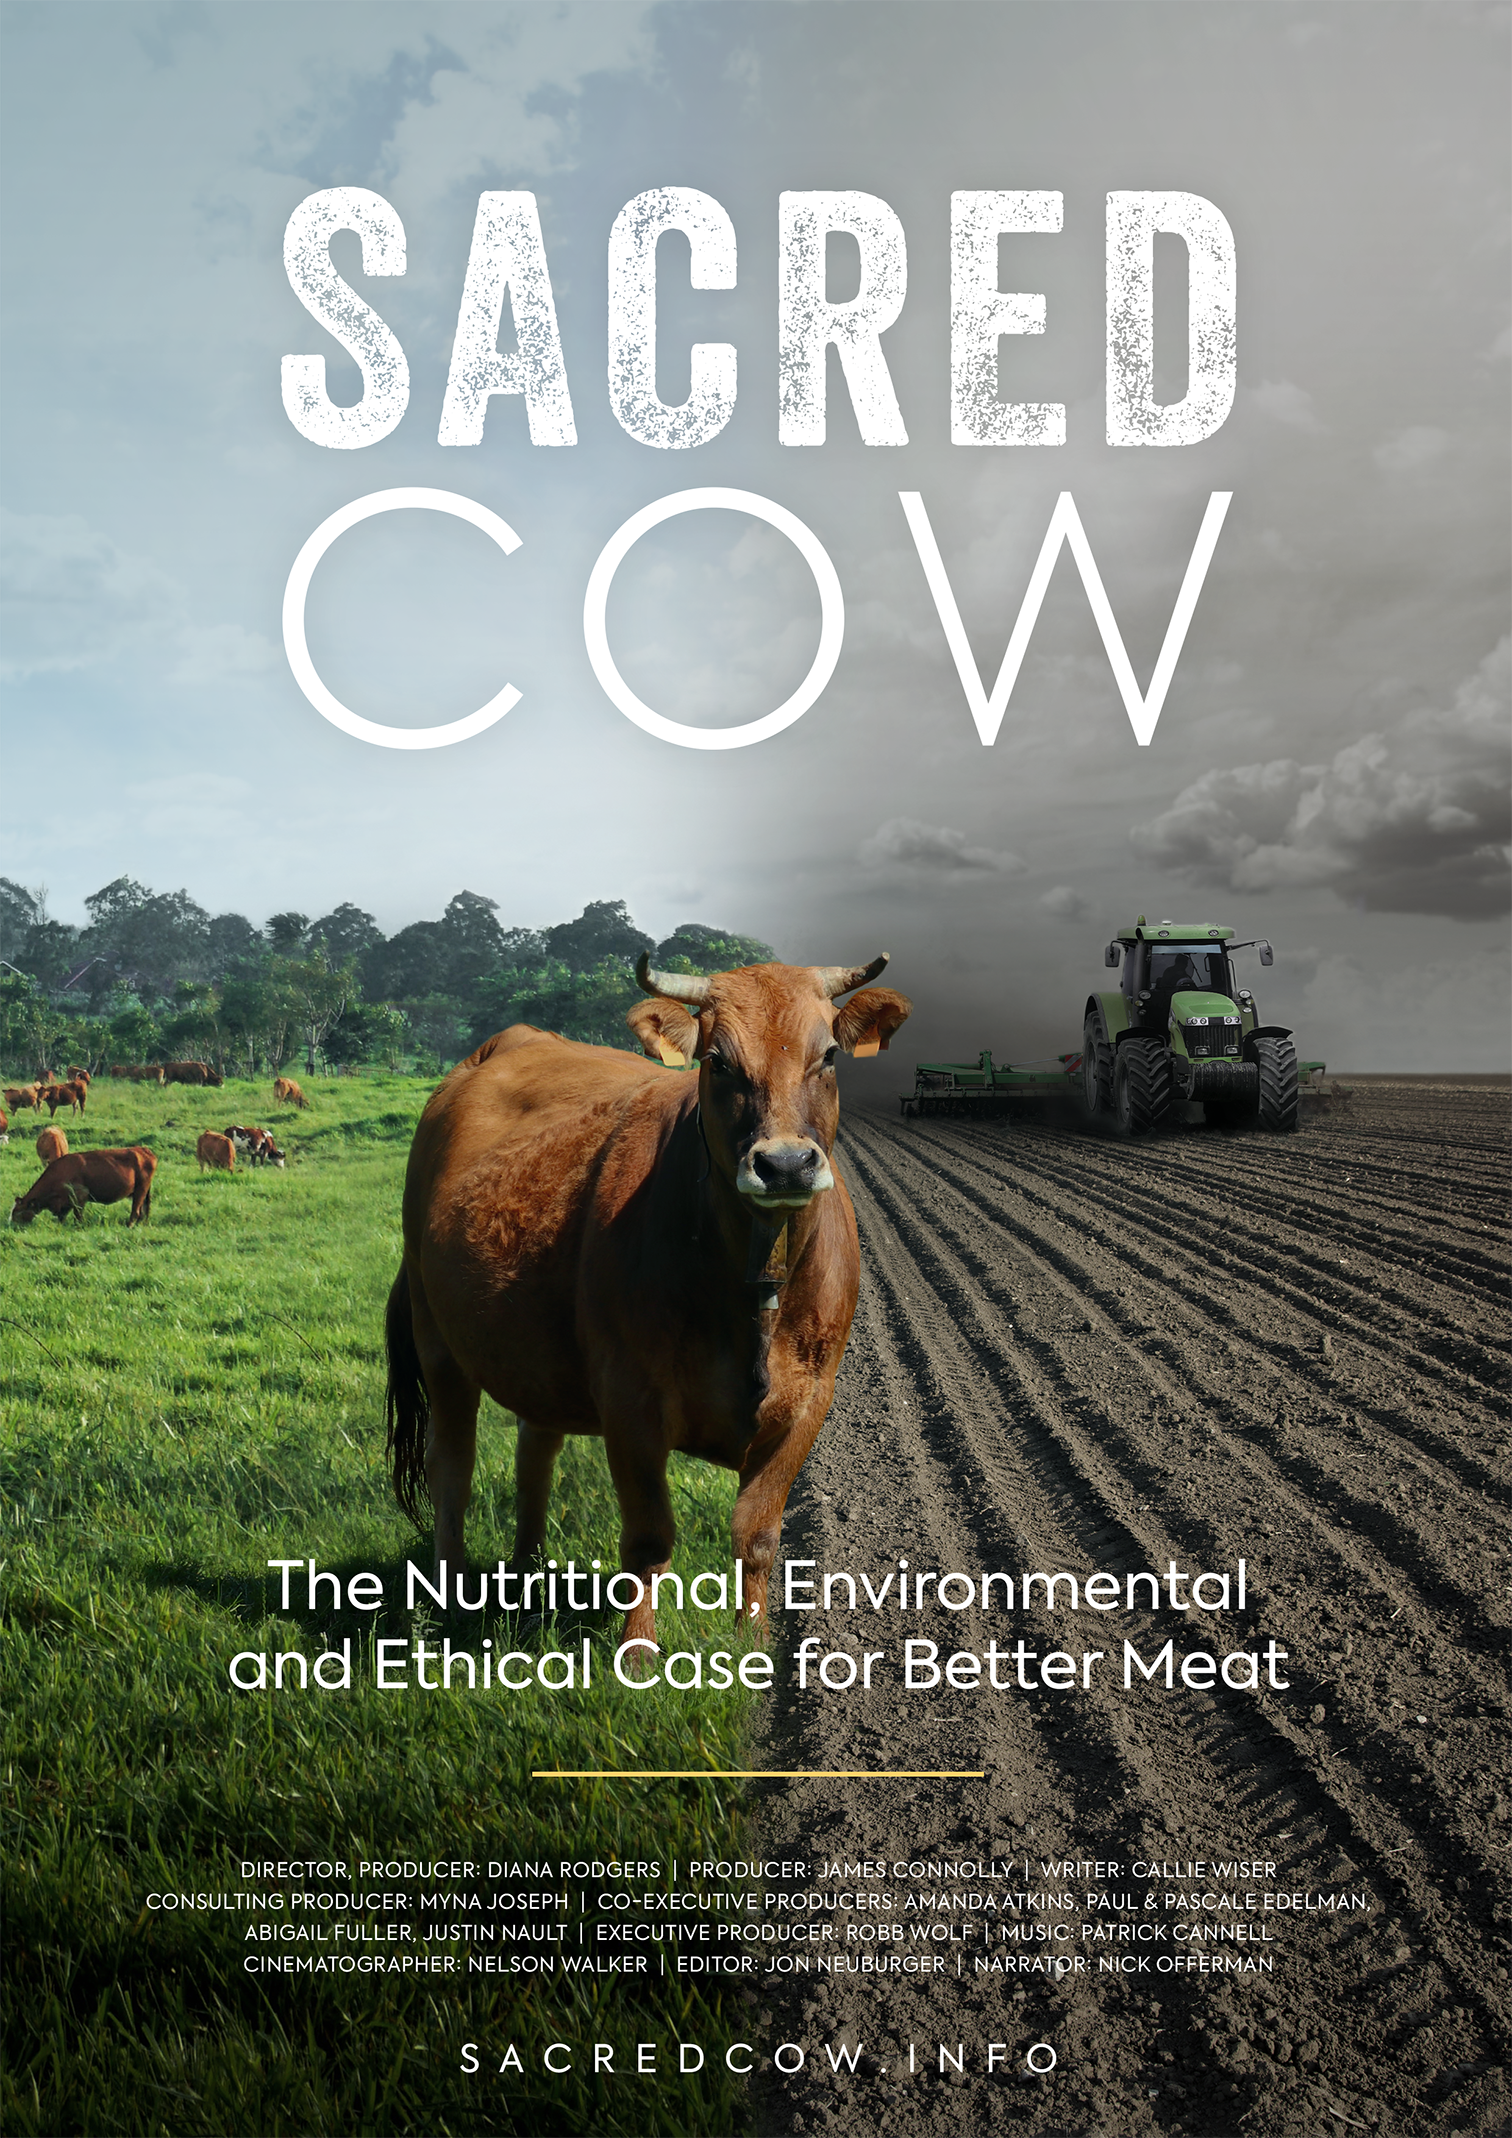 About the Film — Sacred Cow